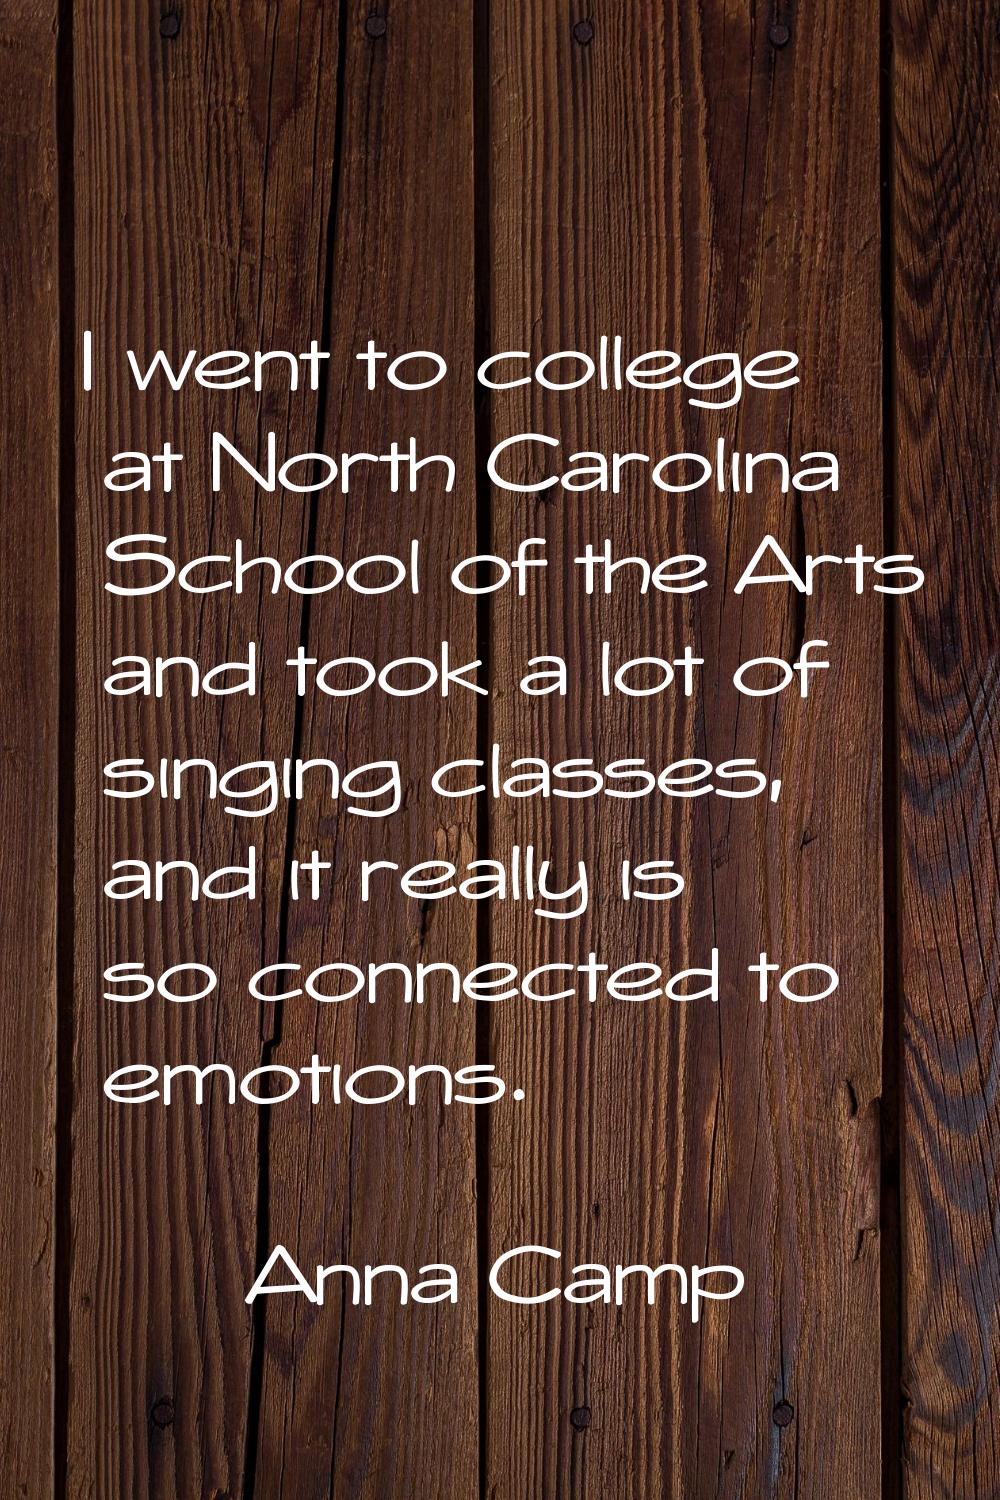 I went to college at North Carolina School of the Arts and took a lot of singing classes, and it re